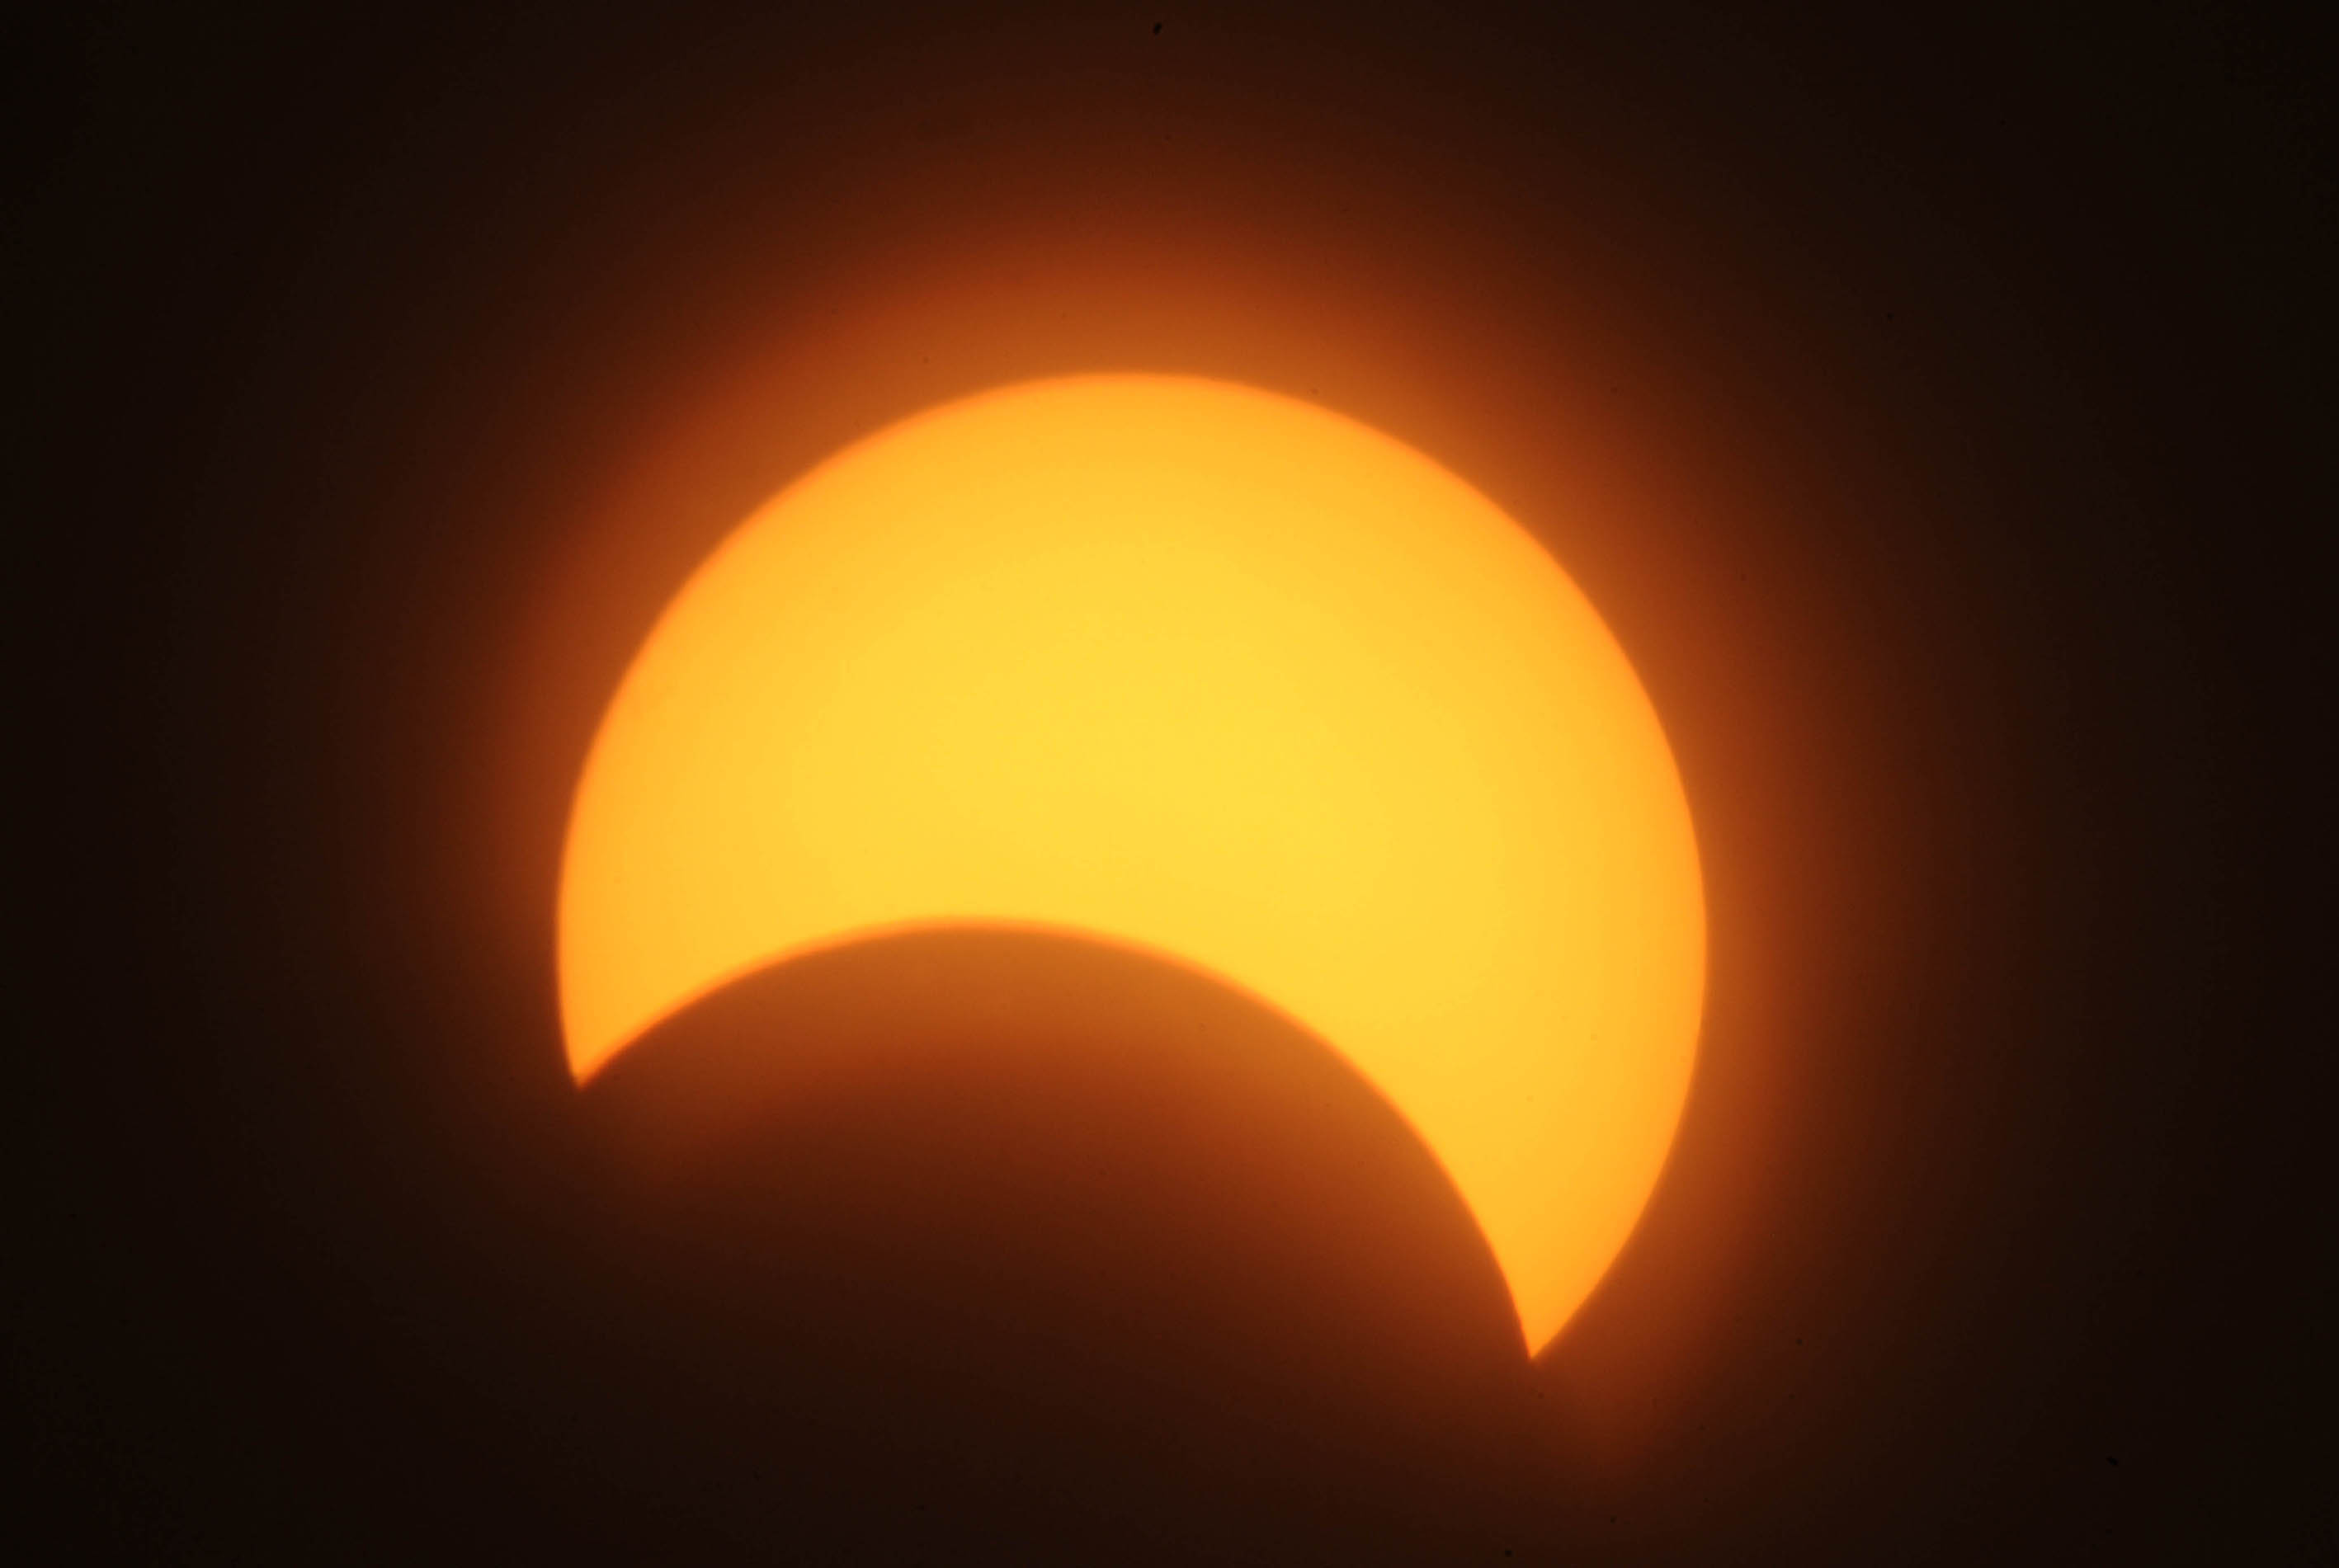 North America Will See Partial Solar Eclipse Thursday | Time